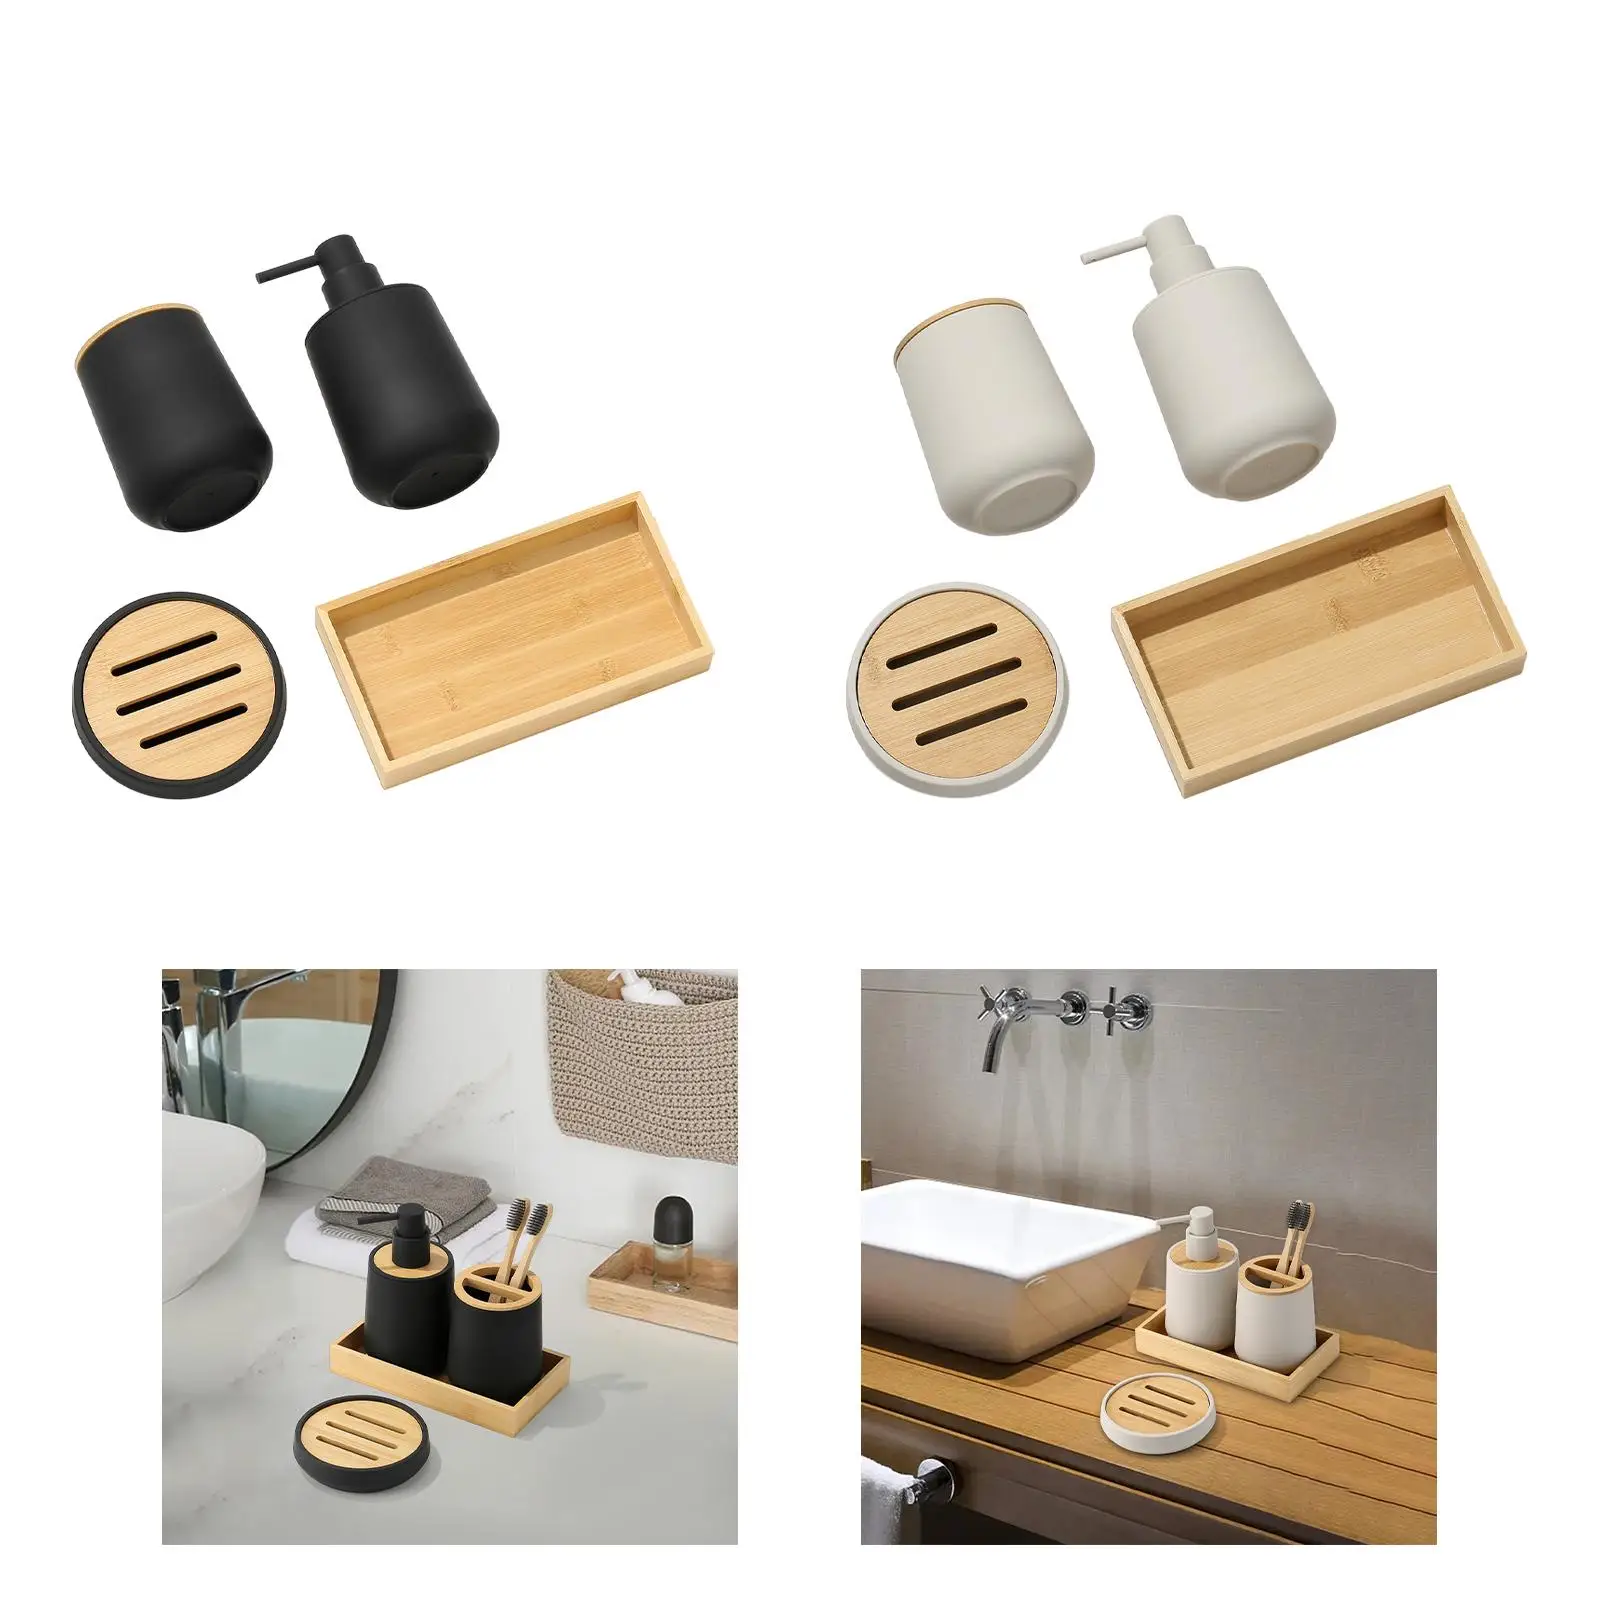 4Pcs Bathroom Accessories Set Bathroom Decor for Homes, Hotels Include Lotion Dispenser Soap Dish Toothbrush Cup and Holder